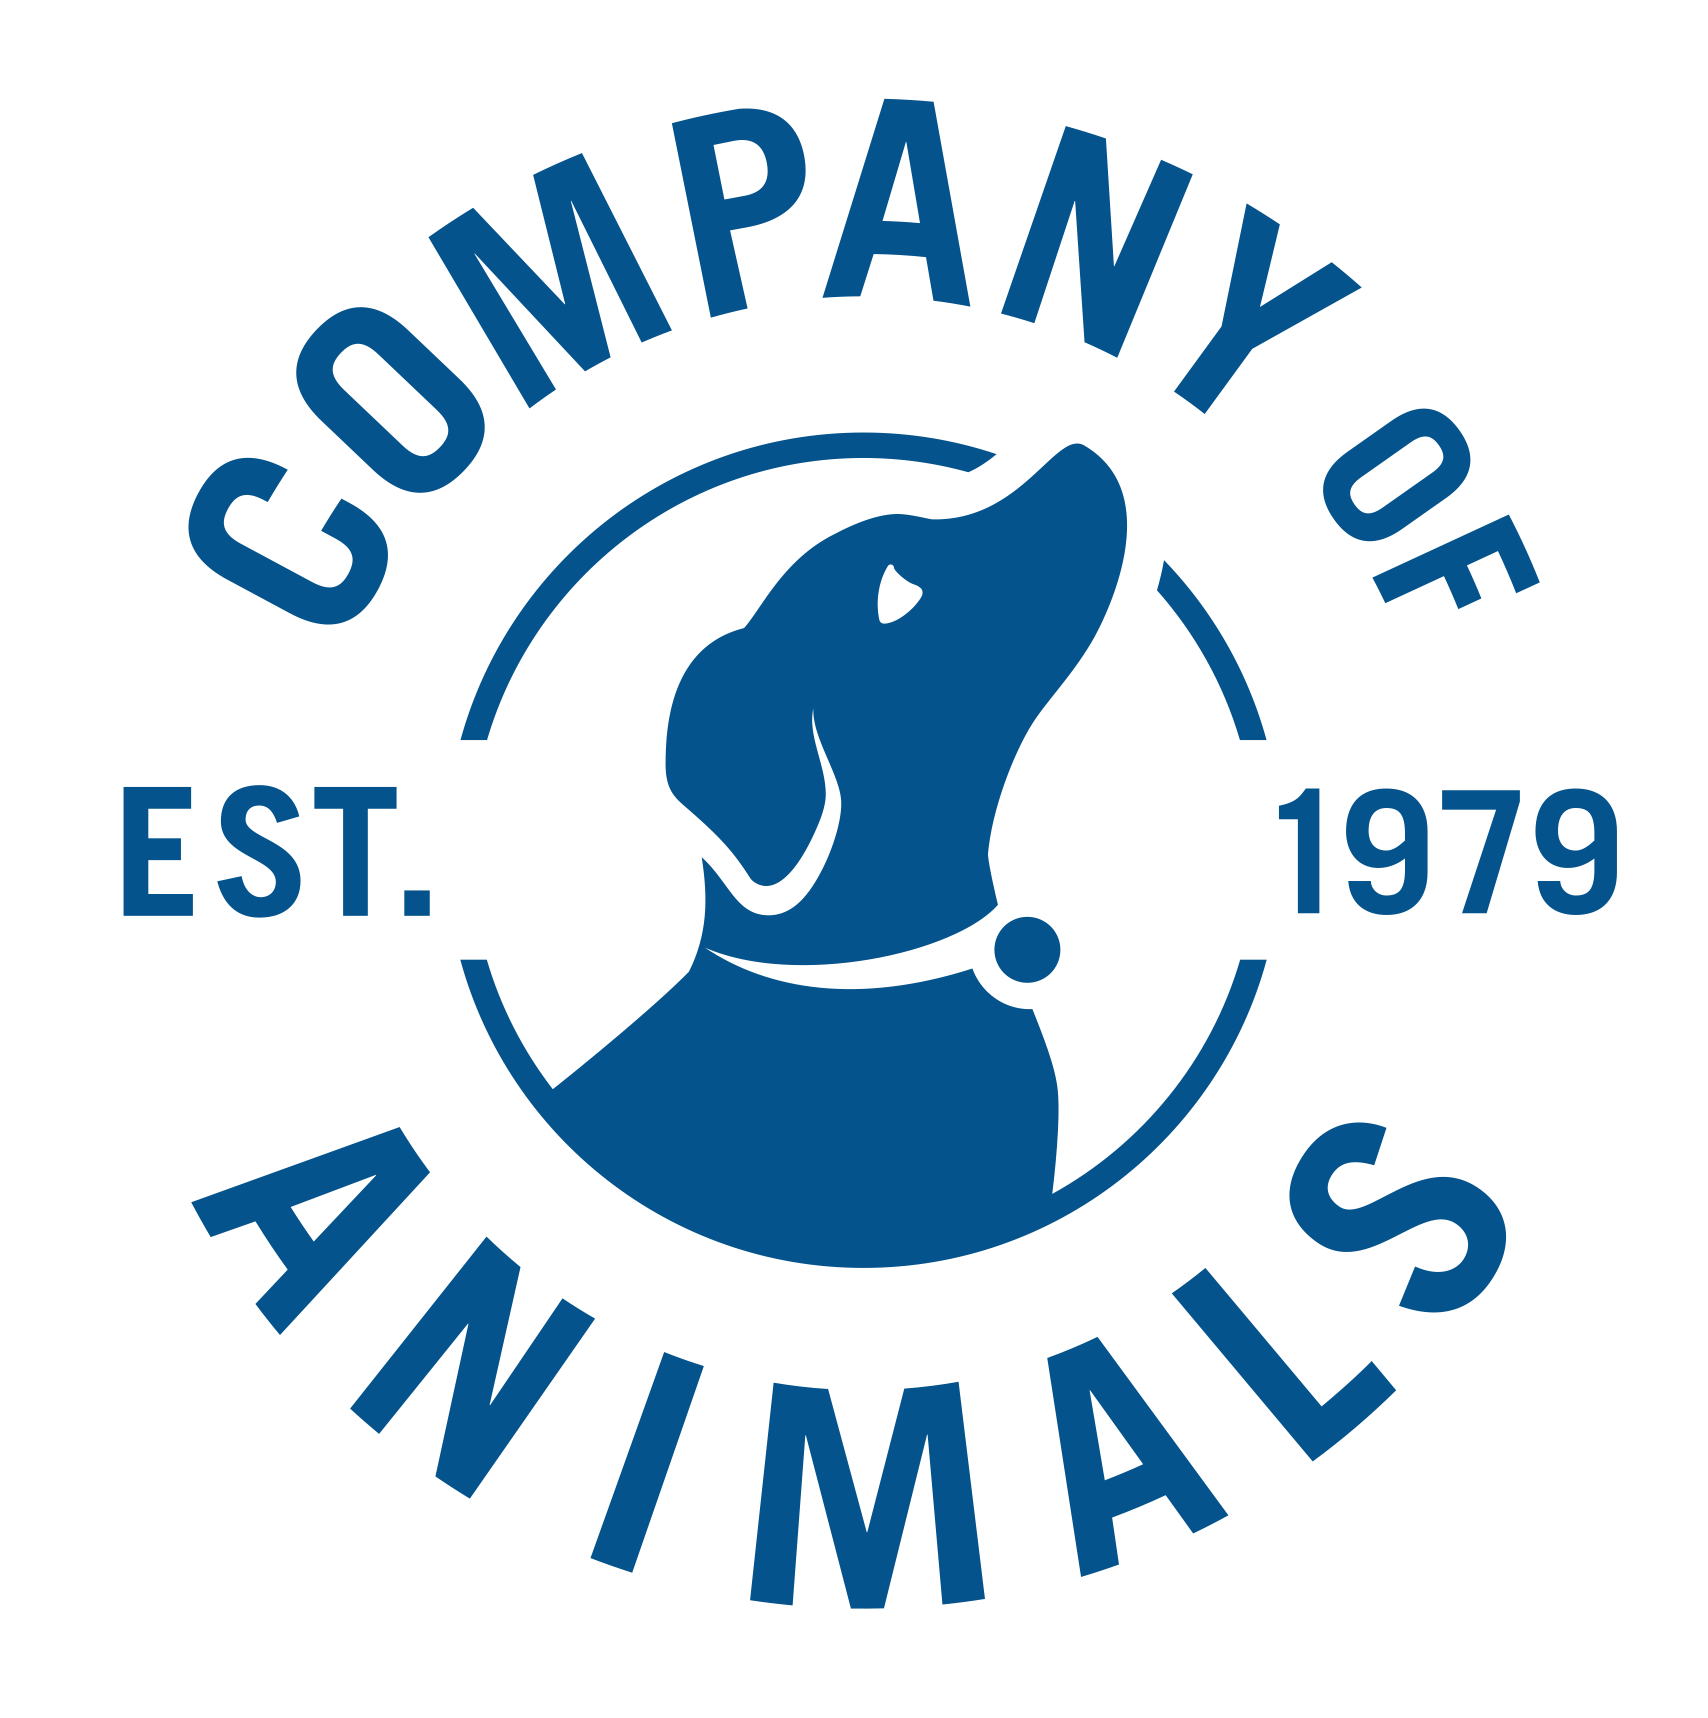 Get 20% off trade price on all the Company of Animals products